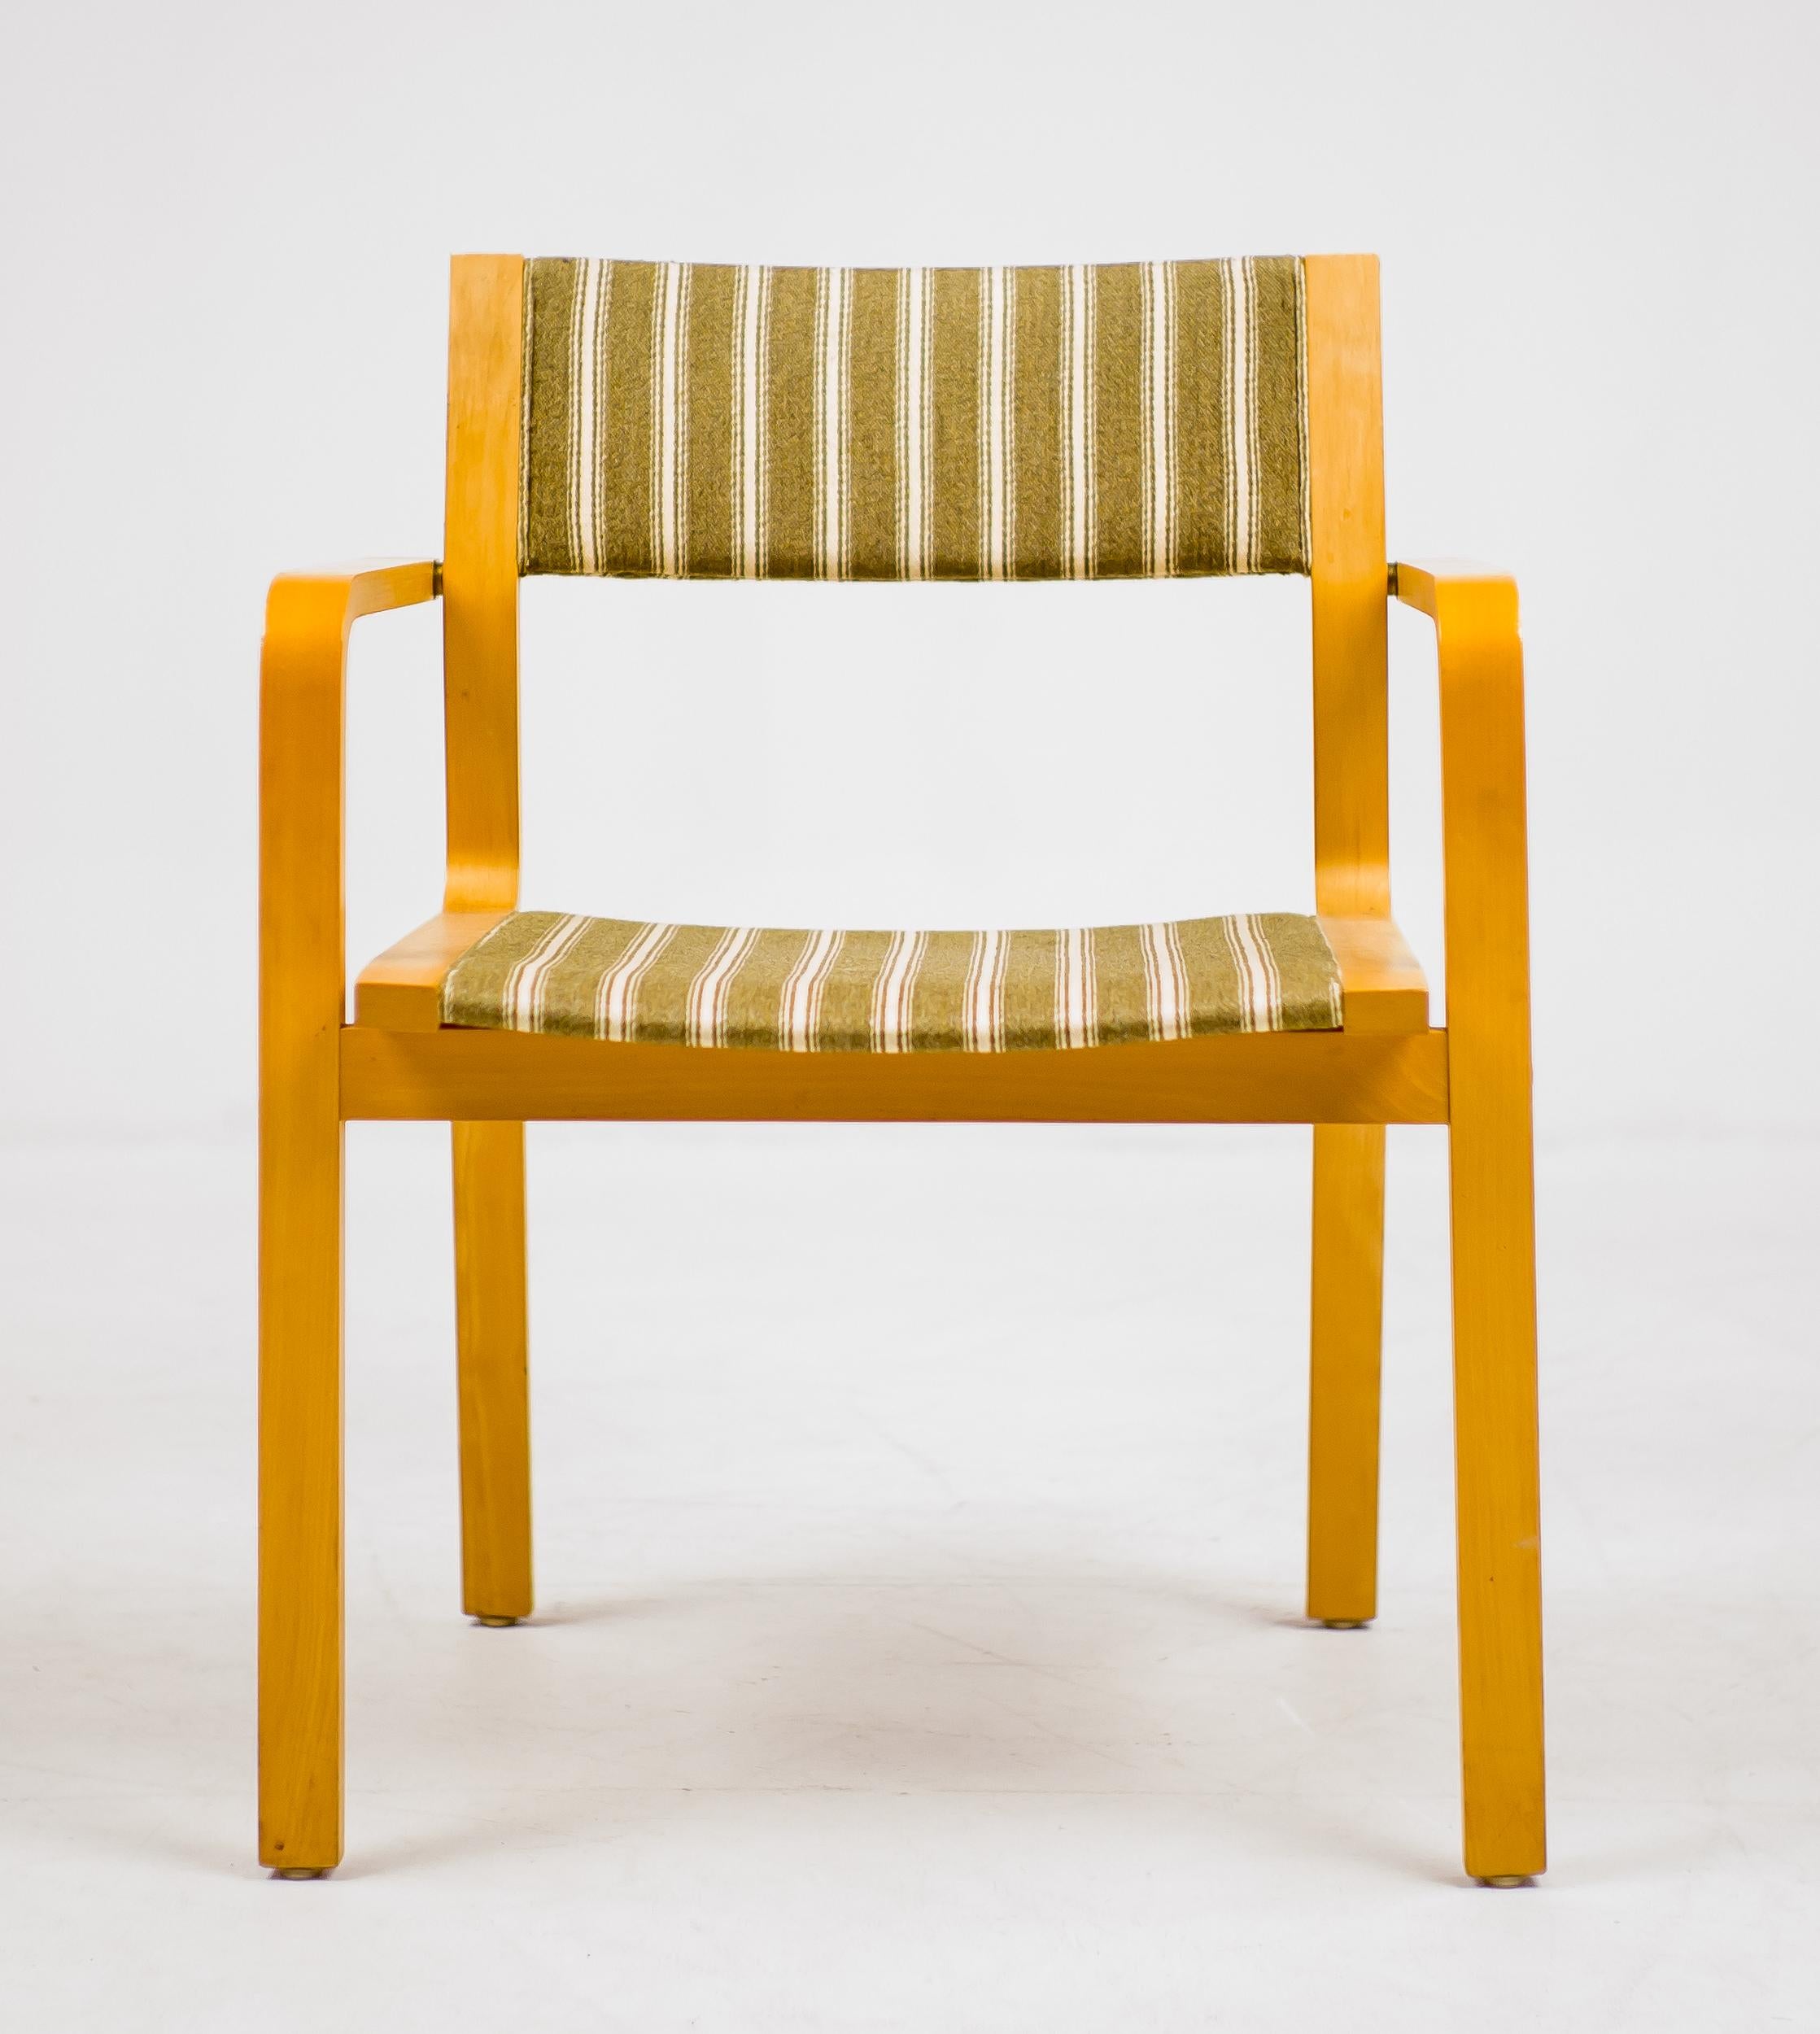 Rare St. Catherine College chair with the original upholstery. Each of the student rooms at St. Catherine College in Oxford, Great Britain was furnished with an easy chair with frames of laminated wood.
These chairs where only made for the St.